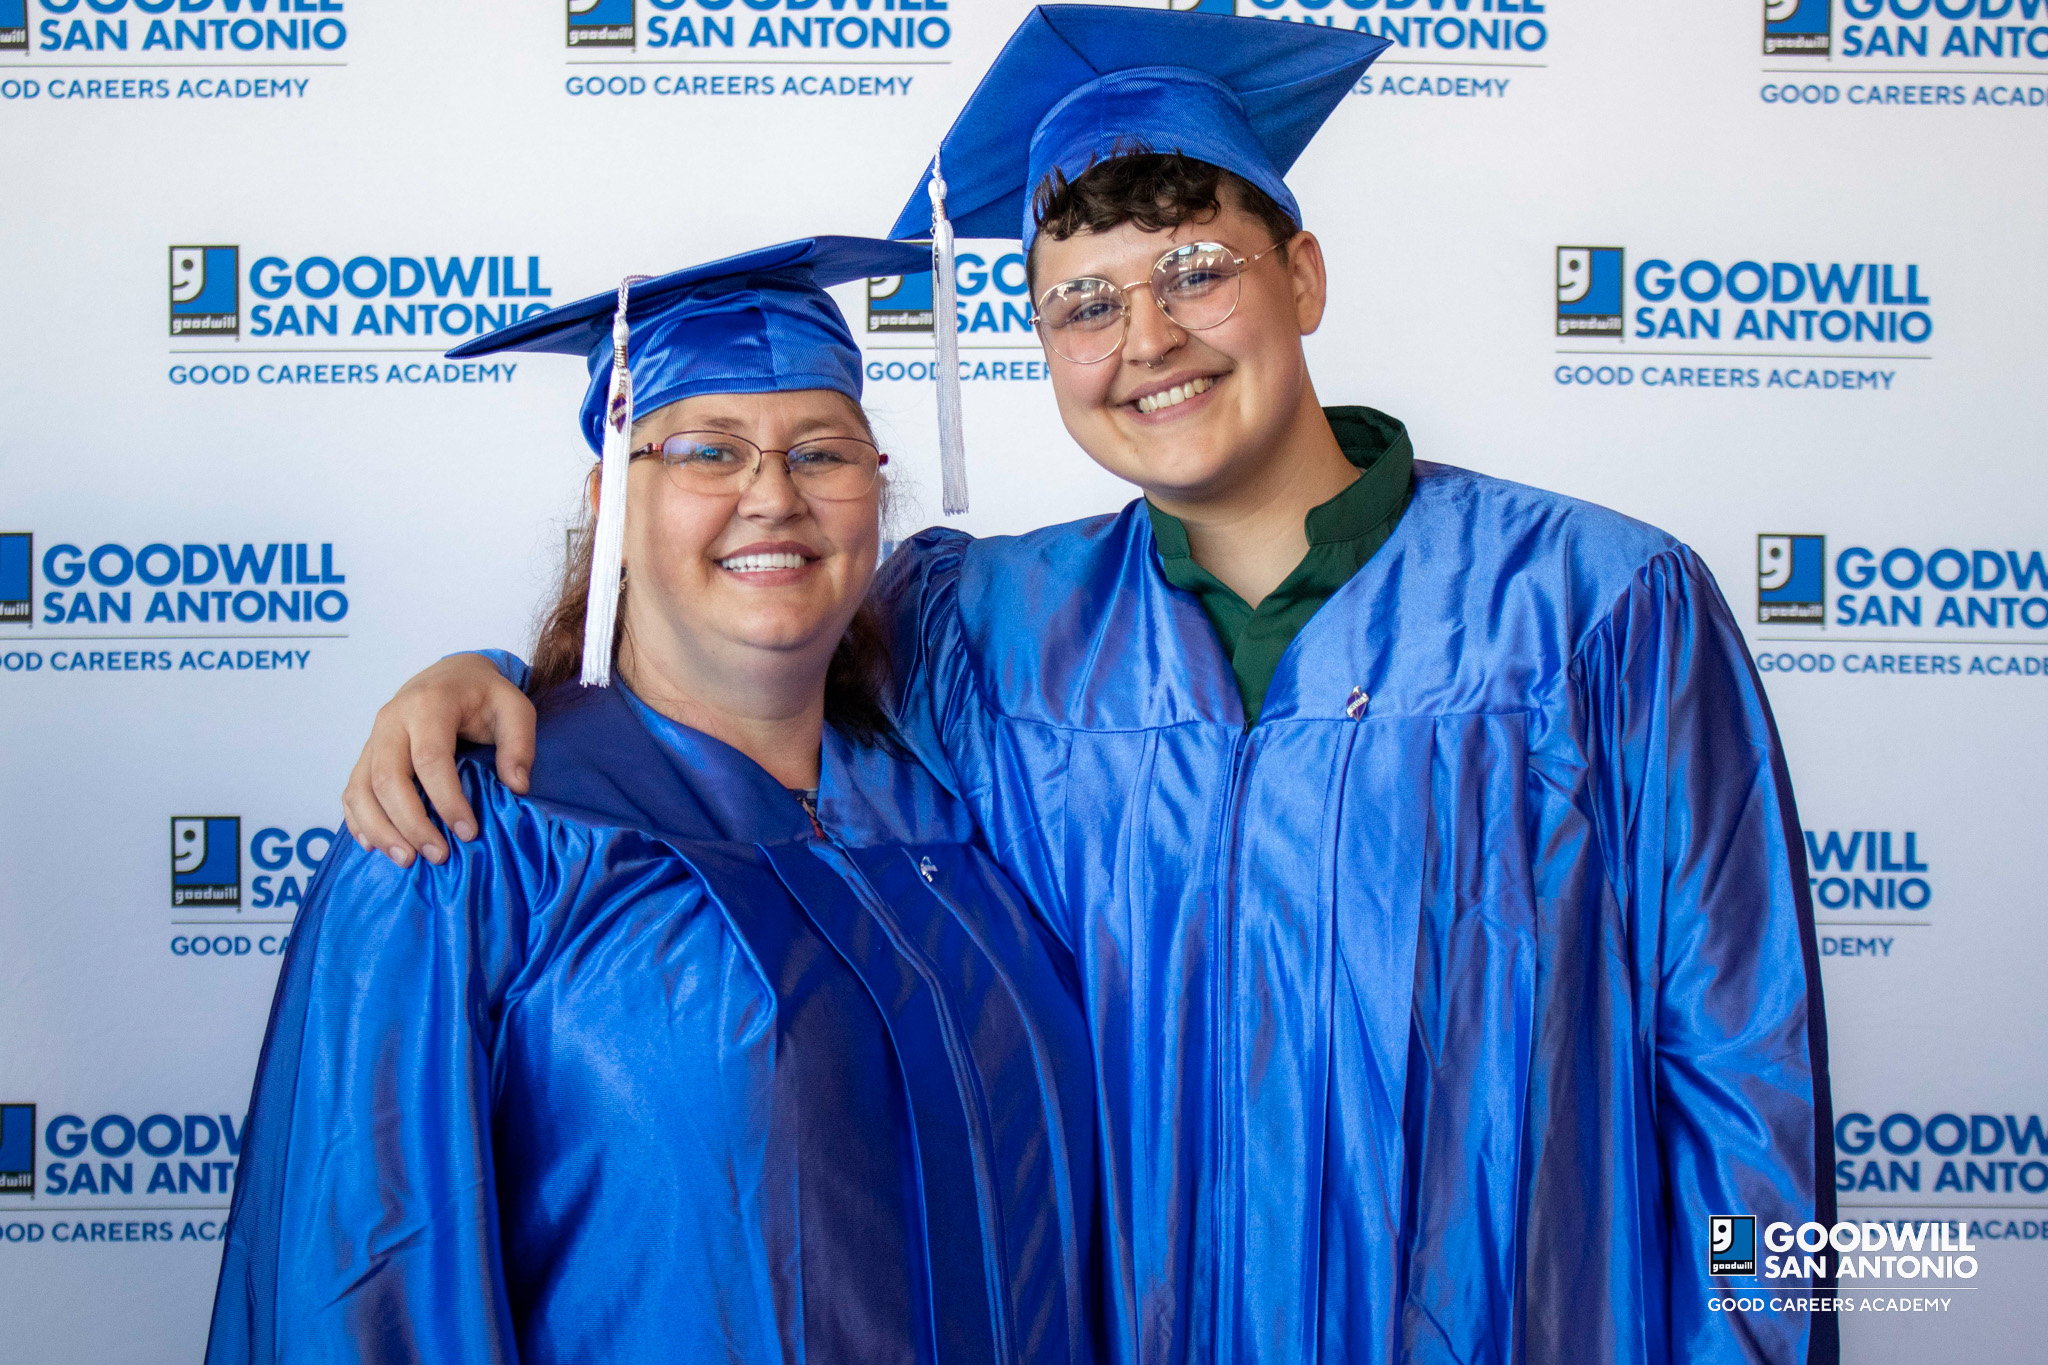 Mother and Daughter Good Careers Academy Graduates